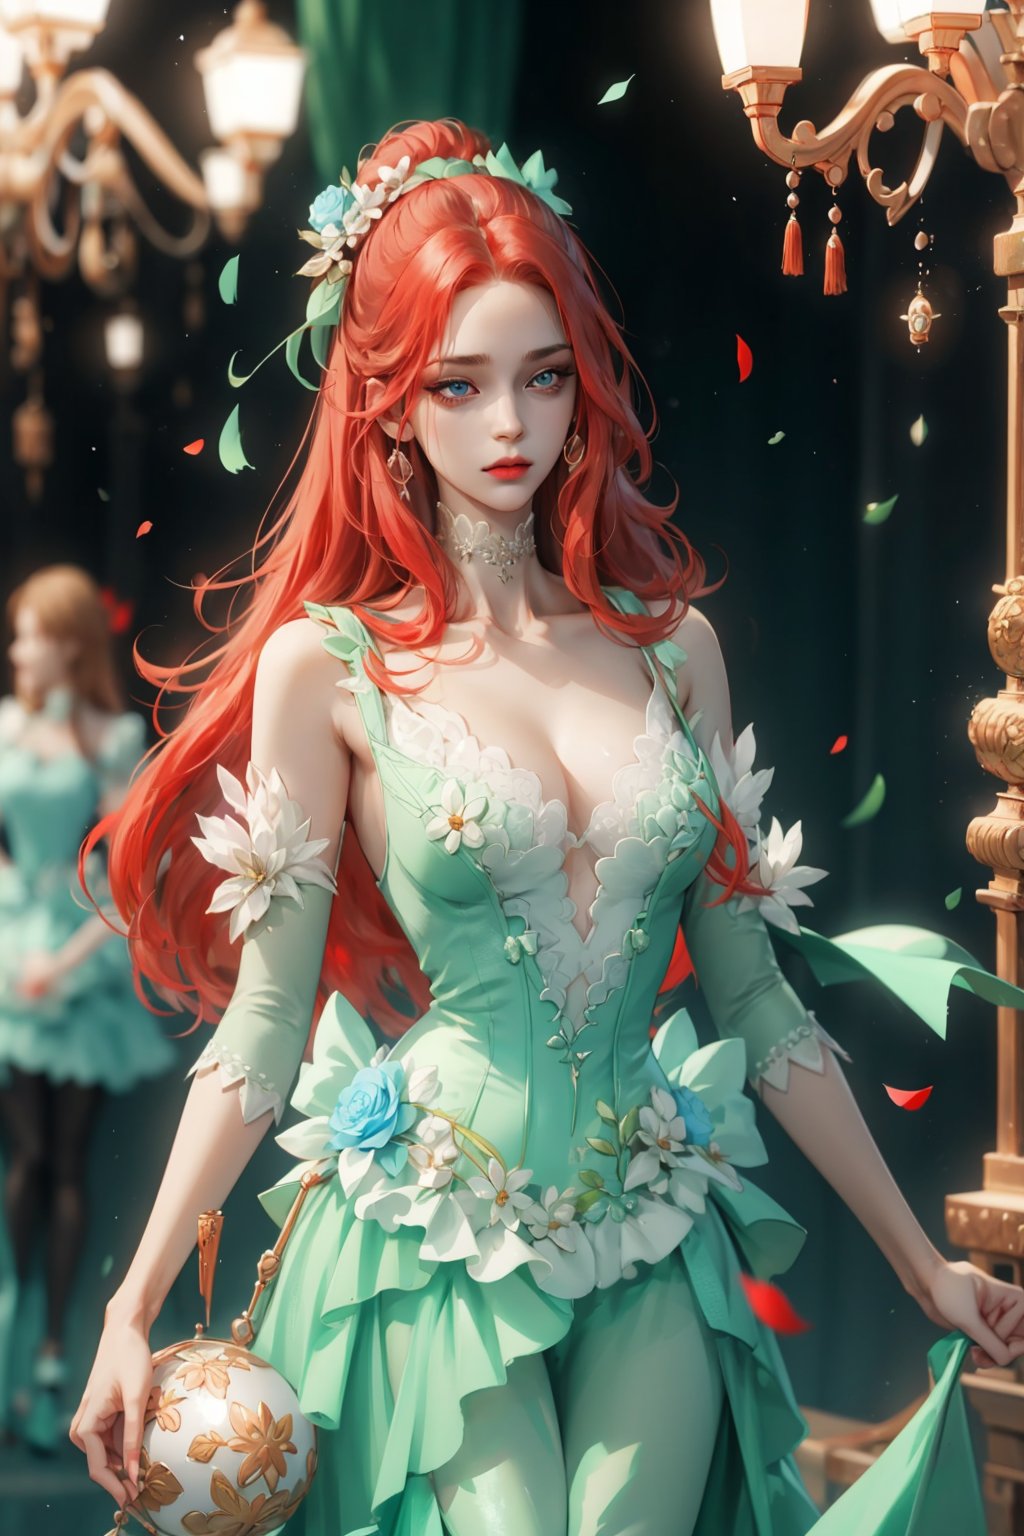 (asterpiece:1.2, best quality), (Soft light), (shiny skin),  ginger_hair, long_hair, hateful look,long dress, ball party, ball room, ballgown, eye_lashes, collarbone, victorian, blue eyes, red_long_ hair_girl, crowed, ball party, red and black dress, dancing, standing, holding campaigne, flowers petals,weiboZH,hll